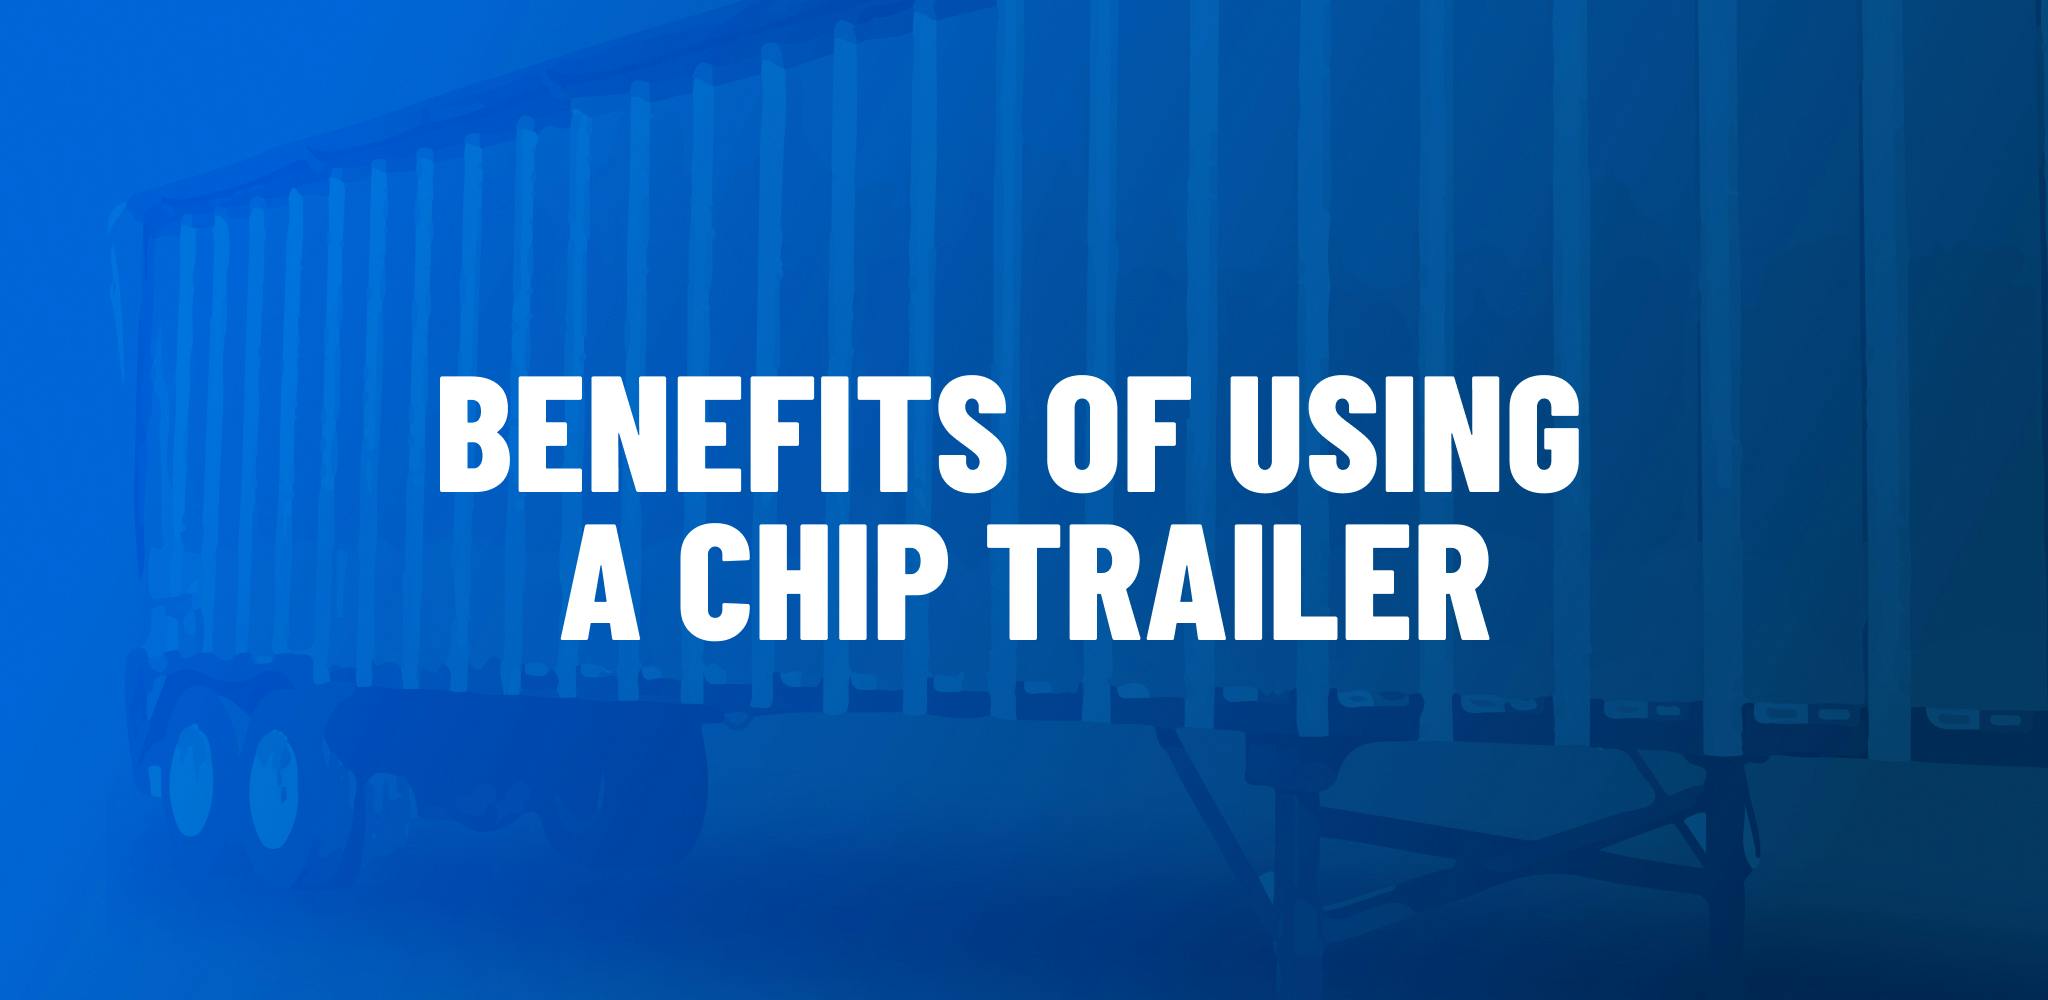 Benefits of using a chip trailer.